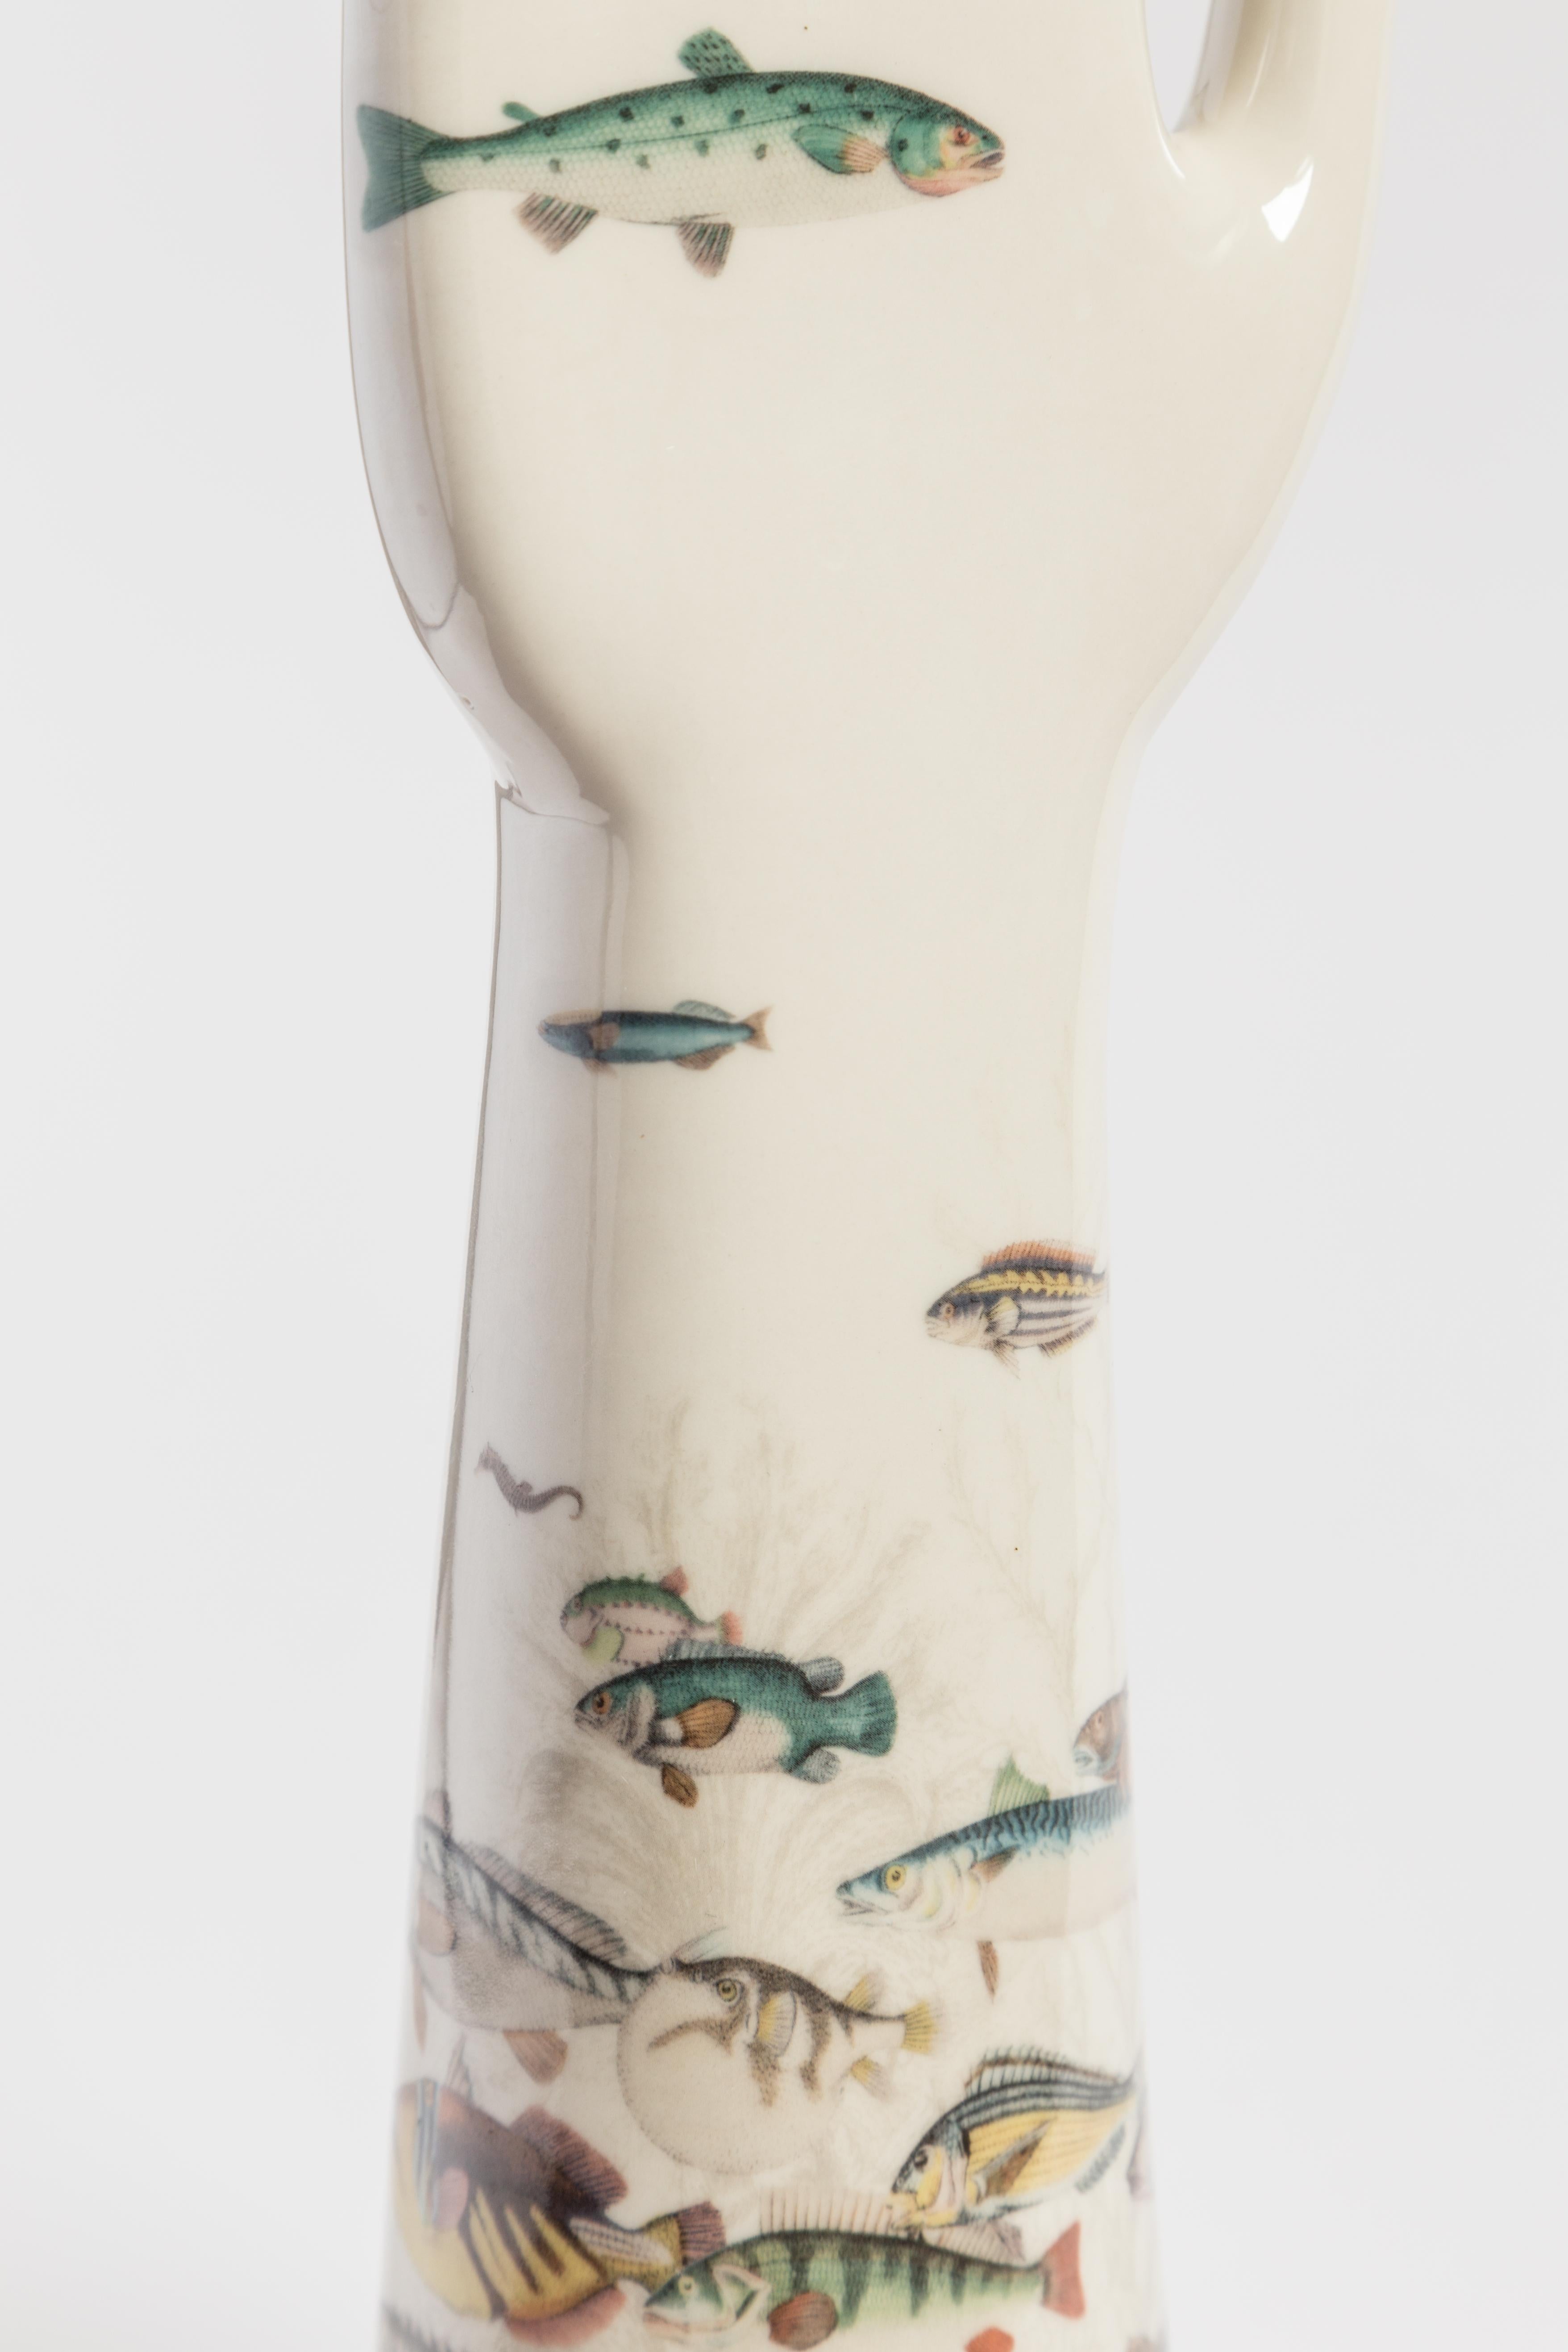 Italian Anatomica, Porcelain Hand with Submarine decoration by Vito Nesta For Sale